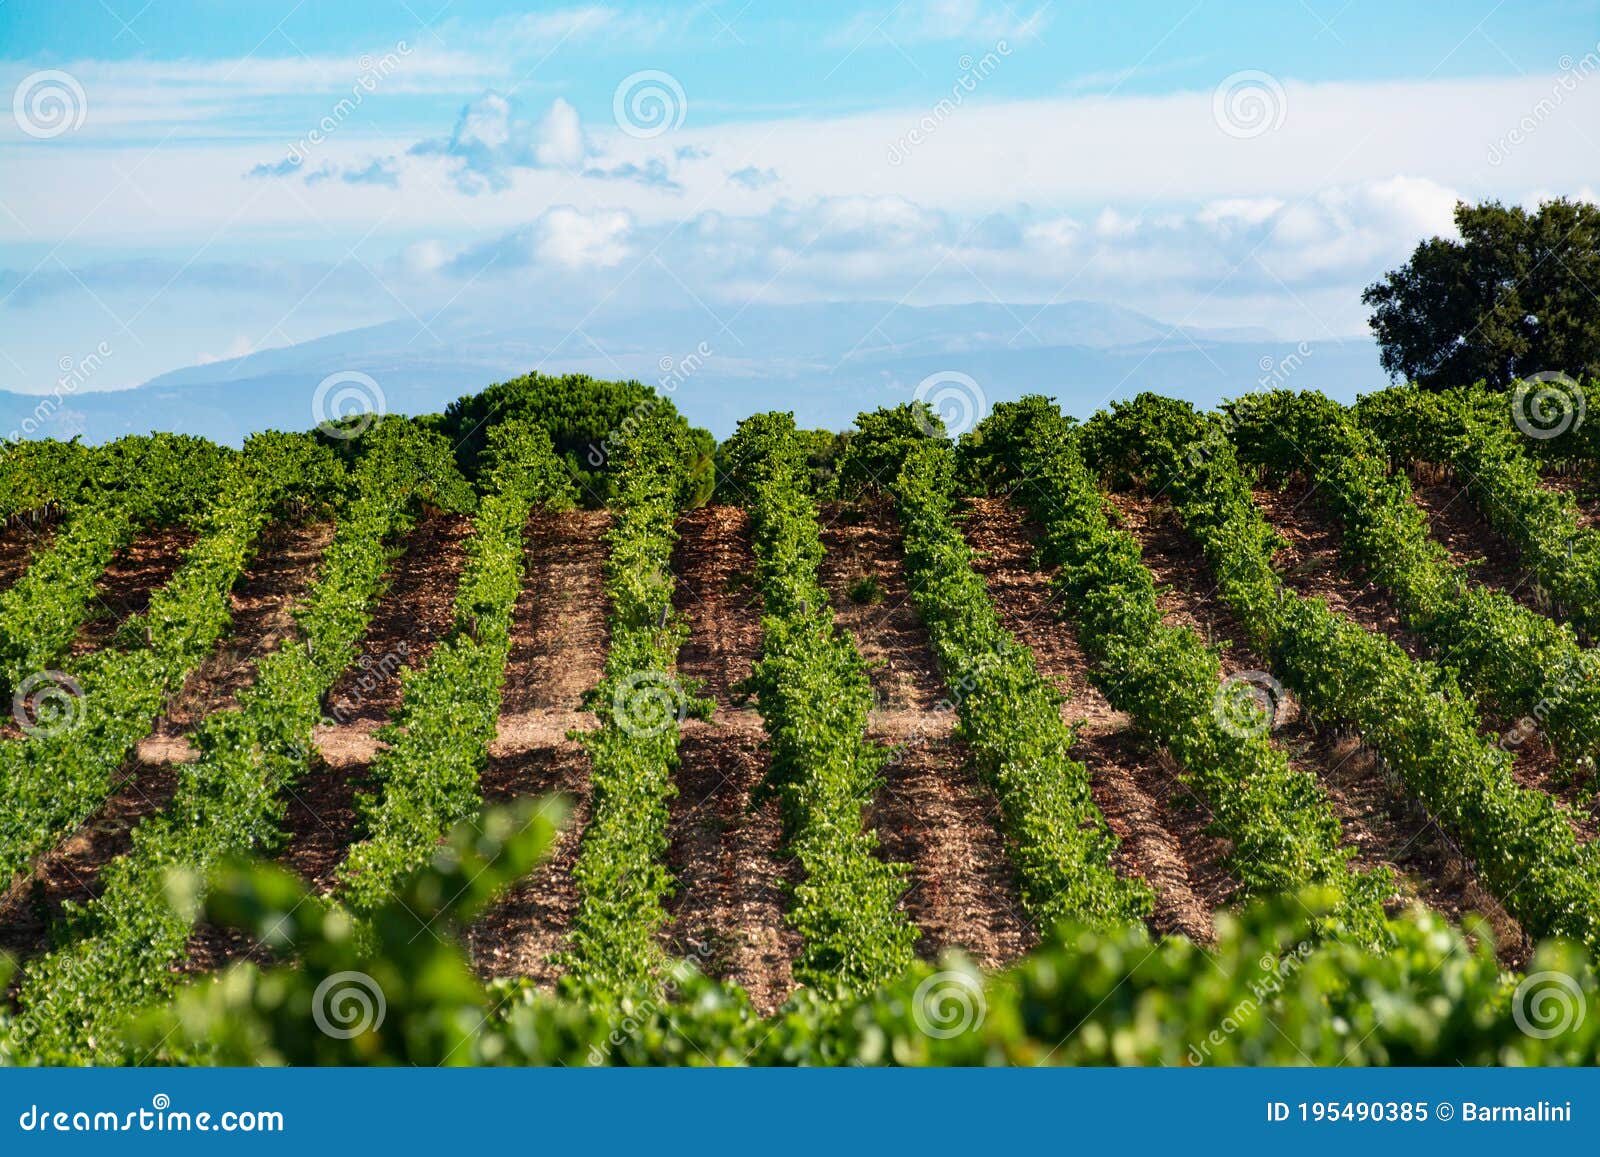 rows of ripe syrah wine grapes plants on vineyards in cotes  de provence, region provence, south of france